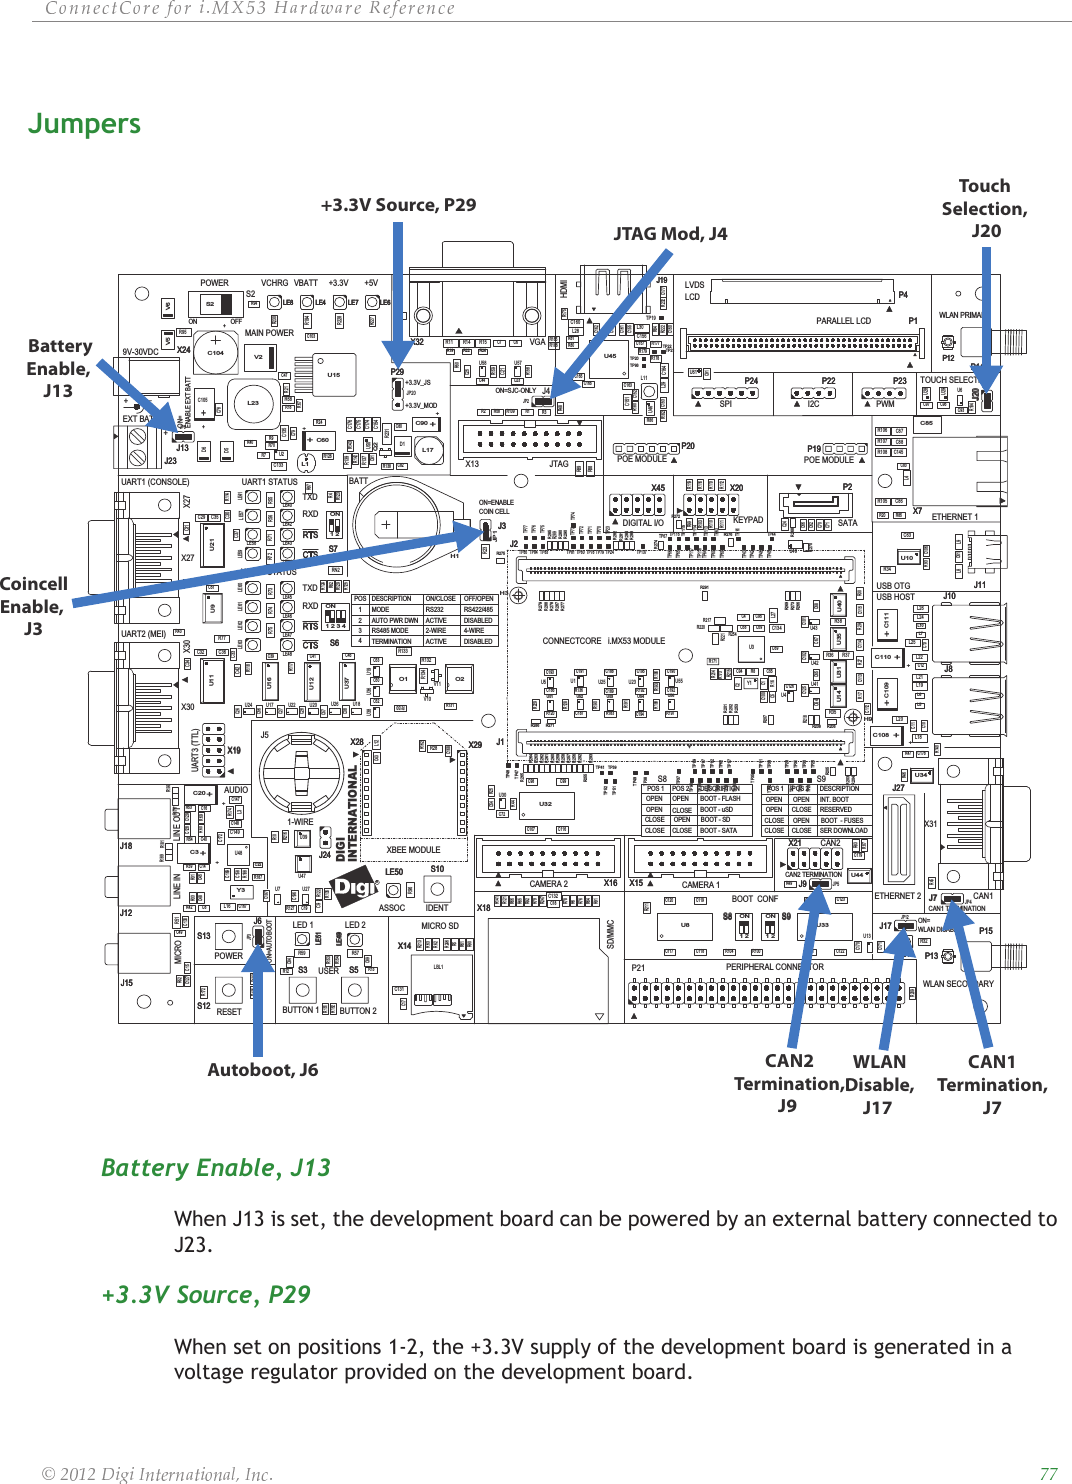 ȱ ȱ ȱ ȱ ȱ ȱȱ ȱ ȱ ȱ ȱȱȱJumpersBattery Enable, J13When J13 is set, the development board can be powered by an external battery connected to J23.+3.3V Source, P29When set on positions 1-2, the +3.3V supply of the development board is generated in a voltage regulator provided on the development board.RU3U50ON41 32S6ON1 2S7ON1 2S8ON1 2S9S5S3S13S10H9H3D1U21U11Q2U8 U33U32X18P24 P22 P23P29X24J1J2P1P21X19X21X45 X20J24J13J17J6J20J7J9U13U52 U53U51 U54U7U55U56U29U28U61U19U24U38U43U42U41U4U20U22U17U36U18U26U6U2U15JP6JP20JP1JP3JP10JP4JP12JP5J19X32X29X28X7P20J11P19R139J27J10J8L8L26L27L21L19L22L20L25L24L18L28L29L9L12L16L3L4D5V5 V6D6P12P13S12V2X30X27X31X14X16 X15X13U46U10U35U31U14 U40LE59LE62LE63 LE61 LE41LE57LE60LE58LE7 LE6LE4LE8LE51LE49LE40LE43LE42LE44LE47LE48LE45LE46LE12LE50J23P14P15J15J12J18V10V11O1 O2R130R131R51R133R134R28R228R56R71R75R77R74 R55R73R59R72R57R194R96R70R18R132R14R106R108R107R105R15R11+C60+R52R84R41C2C1P2R45R49+C3+R187R189R138R159R188R5R6R7C88C87C145C86R16R42R31R39R33RN2C85R127R8R9R36 R37R34R38R35R95R89R88U37U12U16U45S2C25P4C104+C49C129R53C127C48 C45R182C7 C6L10L6L7L5R142R86+C109++C108++C110++C111+C105++C90+R20R181R176R12 R13R85R94R195R102R101C81C103C120C169C43C53C39C27C159C161C106C46C28C162C57C155R222C163C113 C114 C115C126C101C125 C102C69C100C95C94C59C51C56C41C26C18C50C38C83C55C58C44C89C171C78C166C165C177C84C170C52C196C118C17C123C187C98C167C117C119C79C121C188C191C179R50C99C194C97C122C189C195C158C193C186C124C96C197C80C91C93C178R199C148C147C116C107C190C192C168C112R30R17R93R27 R29R135R122R10U9+C20+R246R247C150Y1C153C22L23R143Y3C151C164R23C132C134C160C131C176C175C154C174C135C133C149C70C13C12C47C61C11C71C10C62C66R118R172R4R123R61R62R63R90C23R48R117R64R76R78R141R66R79R121R65R92R91R217R21R221R100R211R110R103R99R113R2R111R126R119R25R184R104R112R1R116R220R254R154R153C157C54R137L17J5U48U47U39U34U44U25U1 U23U27U5R231R204R205R218R208R289R275R274R278R287R273R261R269R206R253R202R281R203R285R290R277R284R266R257R280R282R258R259R260R276R268R22 R26R19R286R283R201R262R263C128R256R265R264R207R271R158R288R272R279R291R177R213R175R179R43R178R140R209R180R232R44R47R98R58R83R24R46R270R40R174R87R109R114R3R97R129R82R124R125R152R68R151R191R227R32R193R190R196R136R230R183R192R128R120R198R229R197R162C82C37C35C15C65 C67 C68C36C4C5C42C29C32C34C33C64C31C156C9C63C19C30C8C14C172R81R80R186R185R67R216C152C130L11L1U57LBL1J4R173R214C24JP2R292C16R69R60L30R215R171U49C21U30J3C72H1R255R293U58R54 C40TP83TP85TP61TP90TP114TP67TP66TP115TP69TP116TP71TP117TP74TP78TP80TP63TP118TP64TP22TP21TP20TP19TP46TP72TP45TP60TP43TP84TP42TP79TP65TP73TP113TP137TP70TP23TP24TP81TP47TP48TP77TP76TP75TP93TP38TP49TP52TP51TP39TP41TP25TP82TP89TP87TP62TP29TP30TP31TP28TP91TP33TP35TP57TP26TP37TP88TP86TP68TP58TP36TP92TP27TP44X14J17 P15S8CAN2SATAPWMON=WLAN DISABLEJ19J12POWERX27 ON=P29S9S9S5_I2CX21CLOSERXDJ1+3.3V_JSSER DOWNLOADJ18+3.3V_MODDIGIJTAGS8IDENTDISABLEDUSERP22+LINE OUTUART3 (TTL)AUTO PWR DWNJ13+VCHRGON/CLOSEP4RESERVEDCAN1 TERMINATIONTXDCLOSEUART1 STATUSX30OPENP12UART2 (MEI)LE51ETHERNET 1SD/MMCOPENX209V-30VDCSPI3LE49X15RS485 MODE+5VDESCRIPTIONVBATTJ81DISABLEDJ10MAIN POWEROPENP24J11LE8BOOT - SATAACTIVEPOS 1OPEN4BUTTON 12-WIRES6LVDSLCDOFF/OPEN4-WIREACTIVEX32POSINT. BOOTVGADESCRIPTION2MICRO SDX28WLAN PRIMARYJ27ON=ENABLECOIN CELLX45MICRO1-WIREJ15INTERNATIONALETHERNET 2LE50CAN1WLAN SECONDARYPOS 2J9P1OPENX29J24LED 2LE4X18S13PARALLEL LCDS3S12XBEE MODULEOFFP2J2ON=AUTOBOOTJ20i.MX53 MODULEPOS 1J7CLOSE OPENRXDCLOSEUART2 STATUSBOOT  - FUSESX16RESETTERMINATIONP14LINE INHDMIX19CLOSEASSOCCLOSE CLOSEBOOT - FLASHPOS 2LED 1CAN2 TERMINATIONS7OPENX7BOOT - uSDBOOT - SDJ6BUTTON 2J23P23S2LE6LE7S10KEYPADMODECAMERA 2RS232CONNECTCORERS422/485EXT BATTENABLE EXT BATTX24TOUCH SELECTIONDESCRIPTIONONUART1 (CONSOLE)+3.3VPOWERLE12CLOSEDIGITAL I/OTXDPERIPHERAL CONNECTORCAMERA 1BOOT  CONFUSB OTGUSB HOSTON=SJC-ONLYAUDIOJ3POE MODULEP19POE MODULEBATTOPENP20P13BatteryEnable, J13 Autoboot, J6CoincellEnable, J3CAN2Termination,J9 CAN1Termination,J7WLANDisable,J17 Touch Selection, J20JTAG Mod, J4+3.3V Source, P29